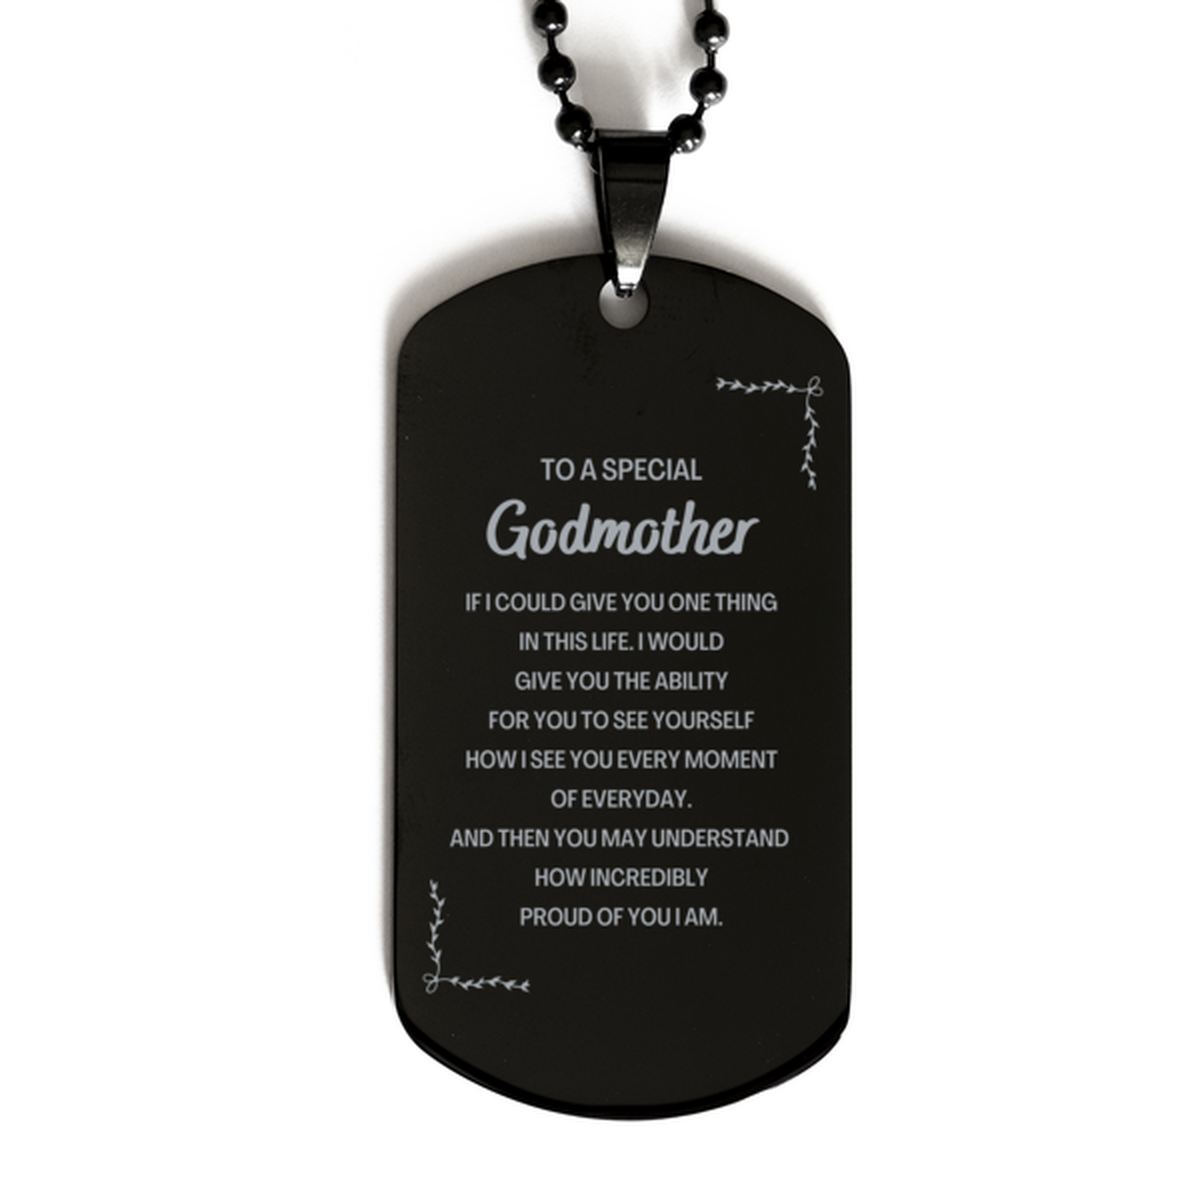 To My Godmother Black Dog Tag, Gifts For Godmother Engraved, Inspirational Gifts for Christmas Birthday, Epic Gifts for Godmother To A Special Godmother how incredibly proud of you I am